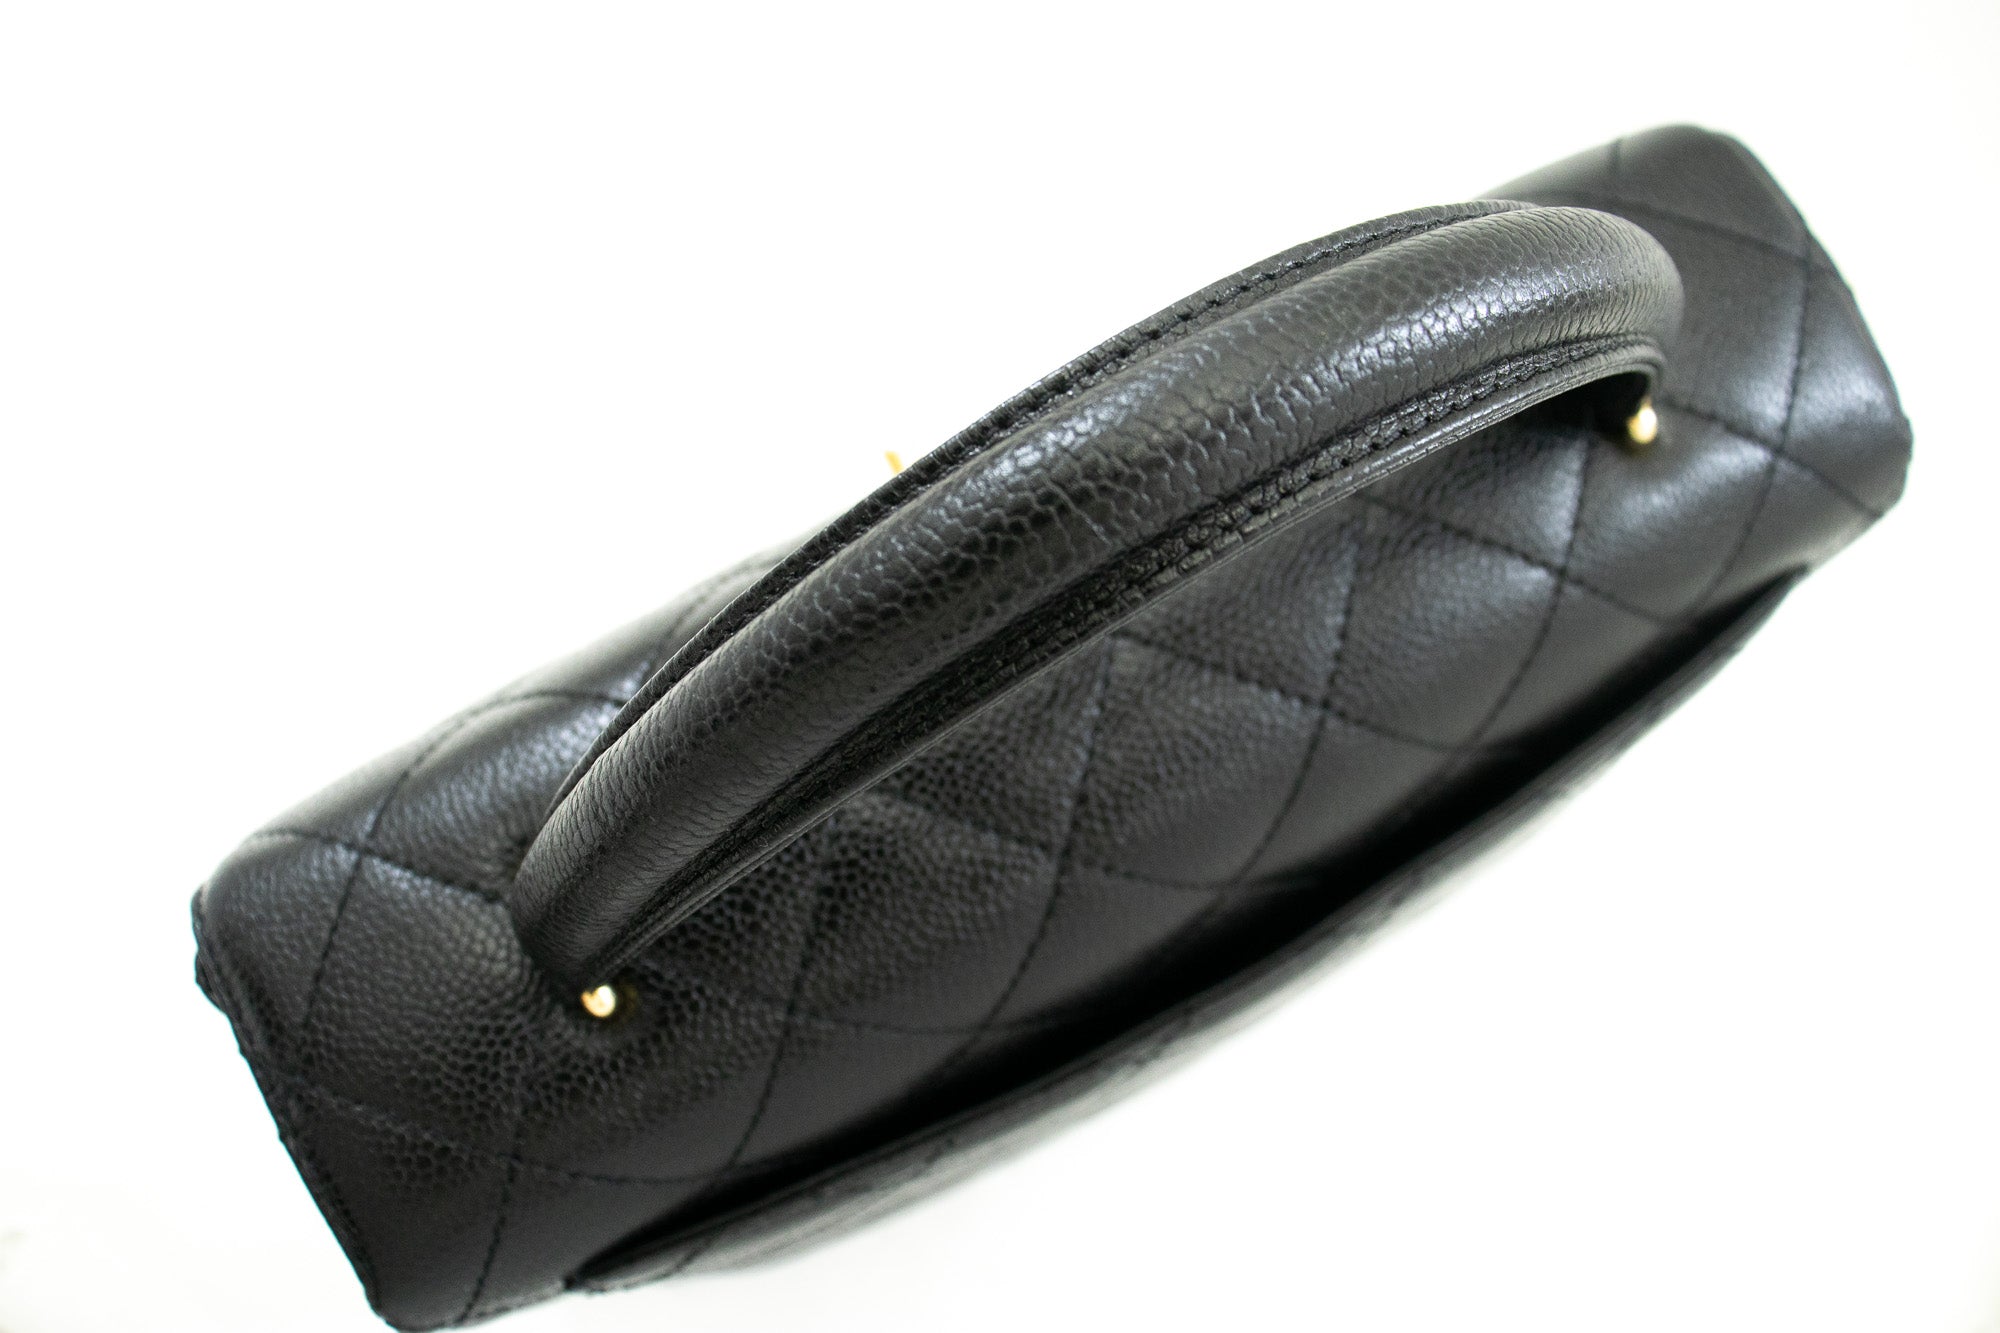 Chanel Black Caviar Quilted Leather CC Tote Chanel